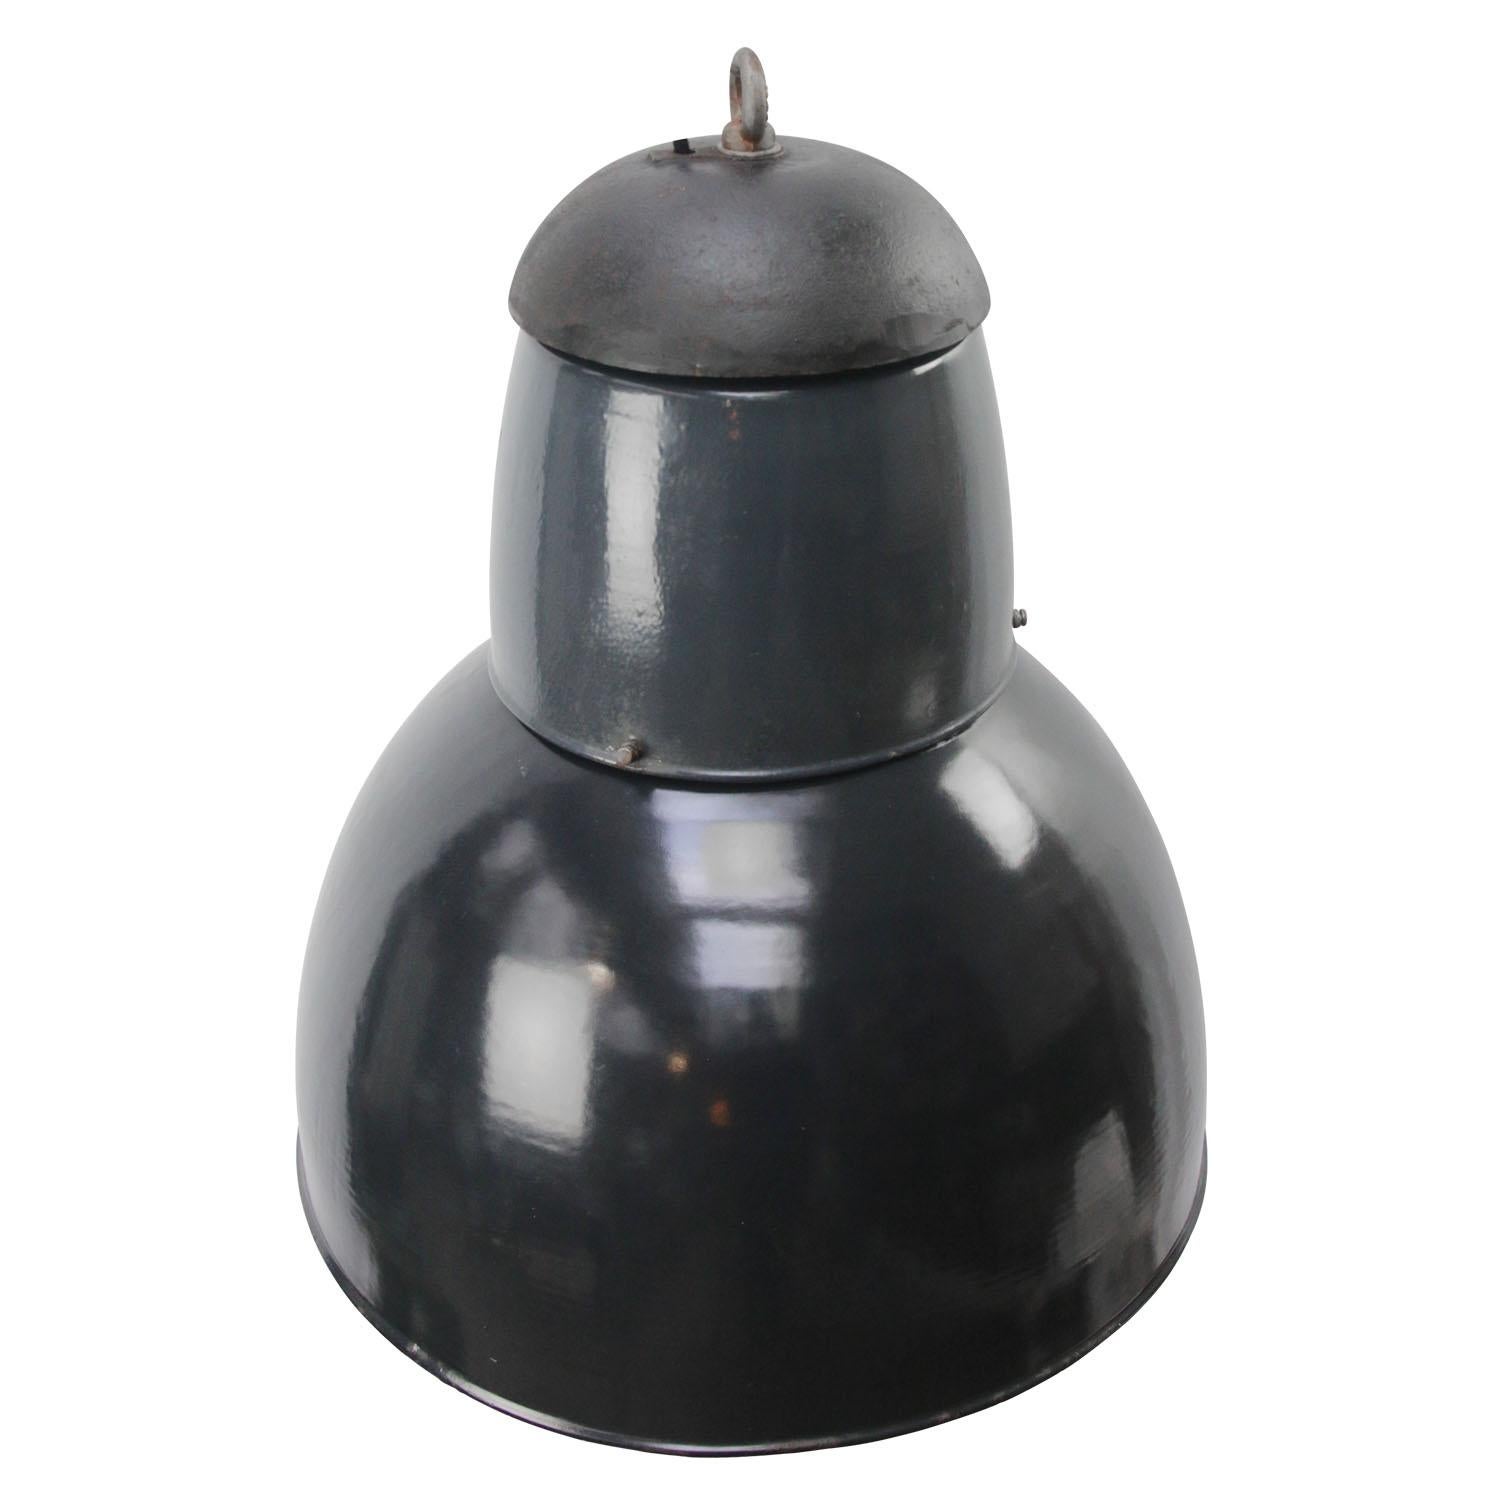 Blue enamel industrial pendant.
Cast iron top. White interior.

Weight: 7.5 kg / 16.5 lb

Priced per individual item. All lamps have been made suitable by international standards for incandescent light bulbs, energy-efficient and LED bulbs.